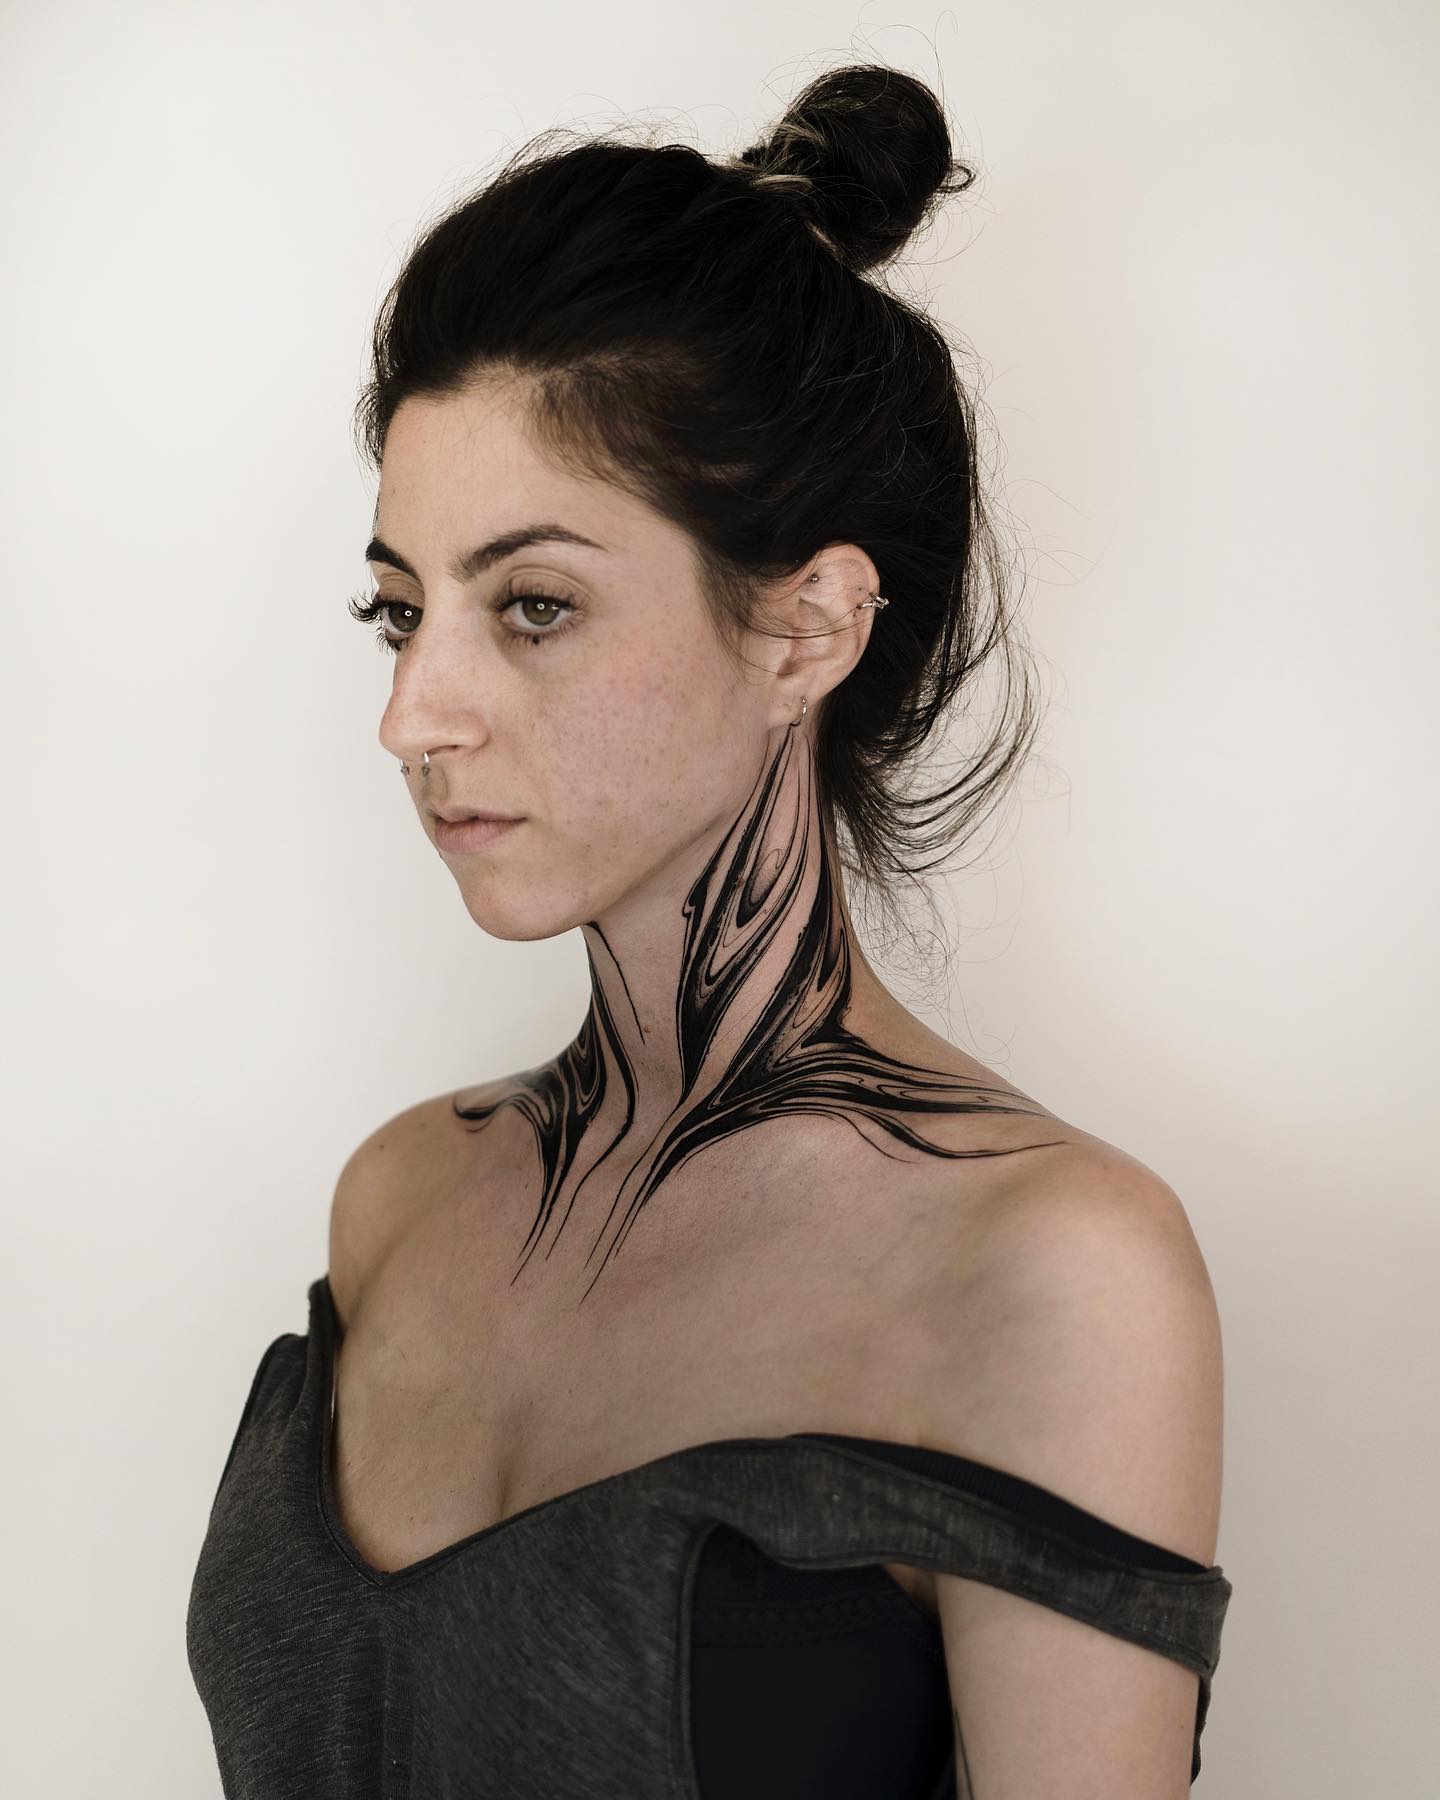 A badass wing tattoo that stretches out to your collarbone. Along with some simple but good-looking lineworks, this tattoo forms a nice piece. Give this stylish throat tattoo a shot.